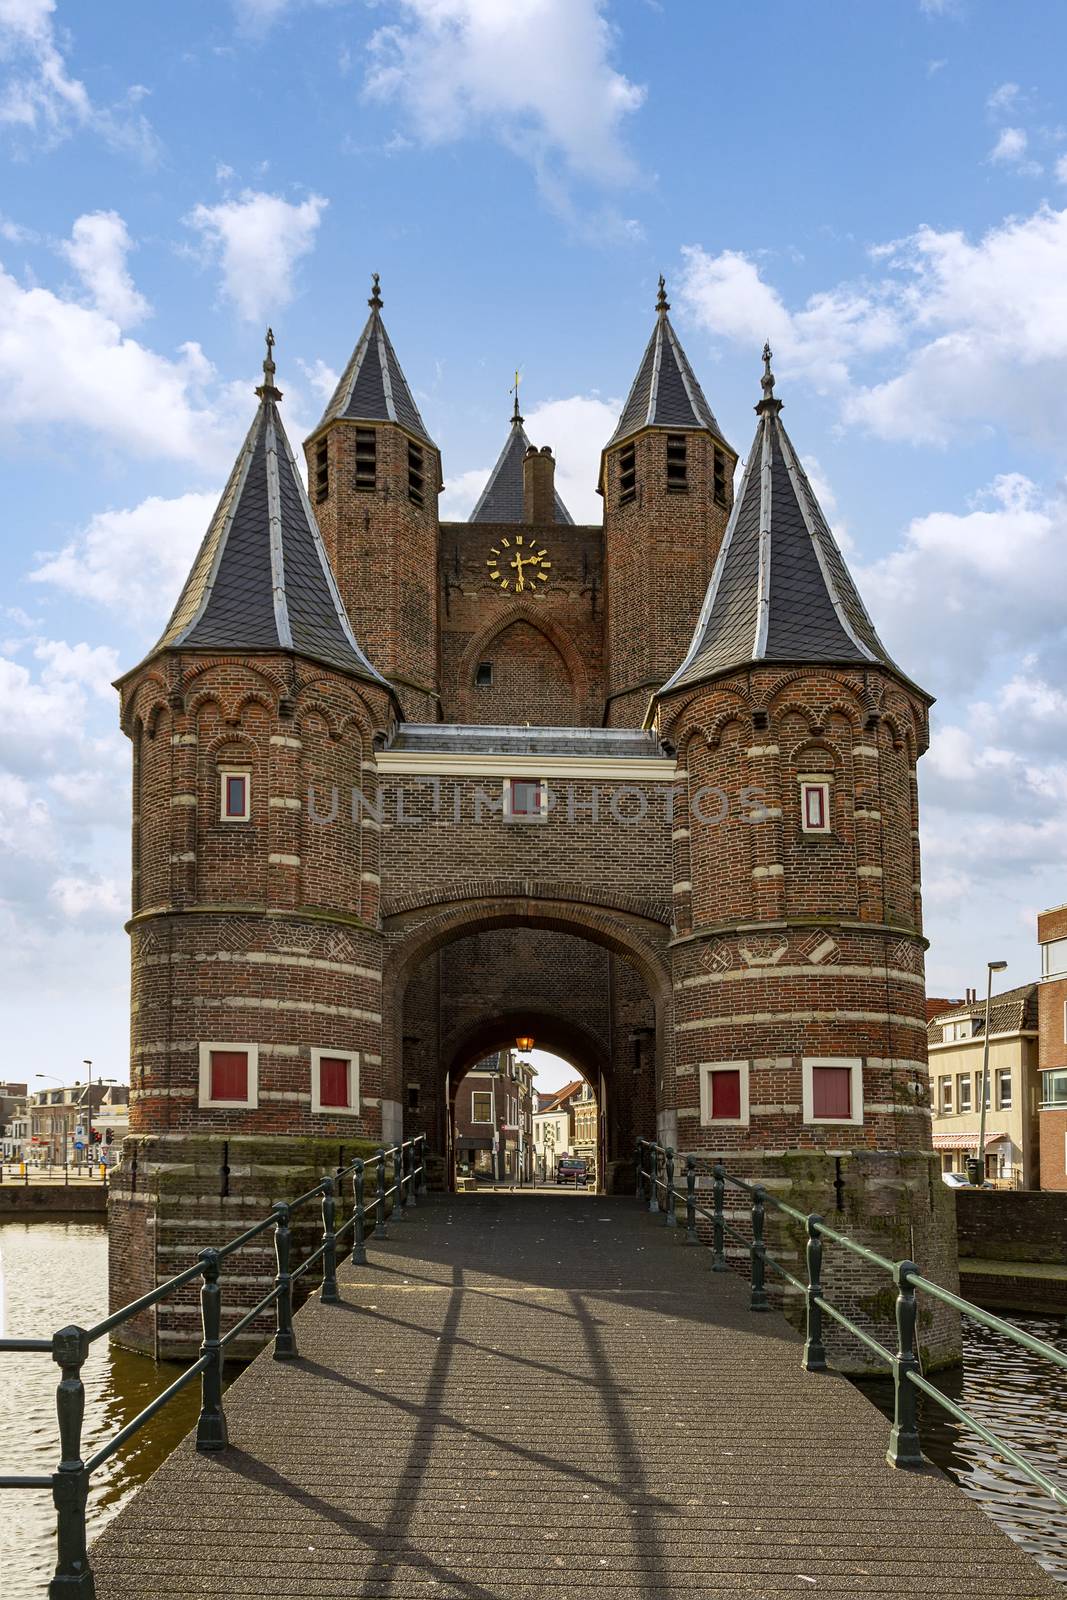 Medieval Haarlem city entry gate above the canal with its bridge and gate keeper towers